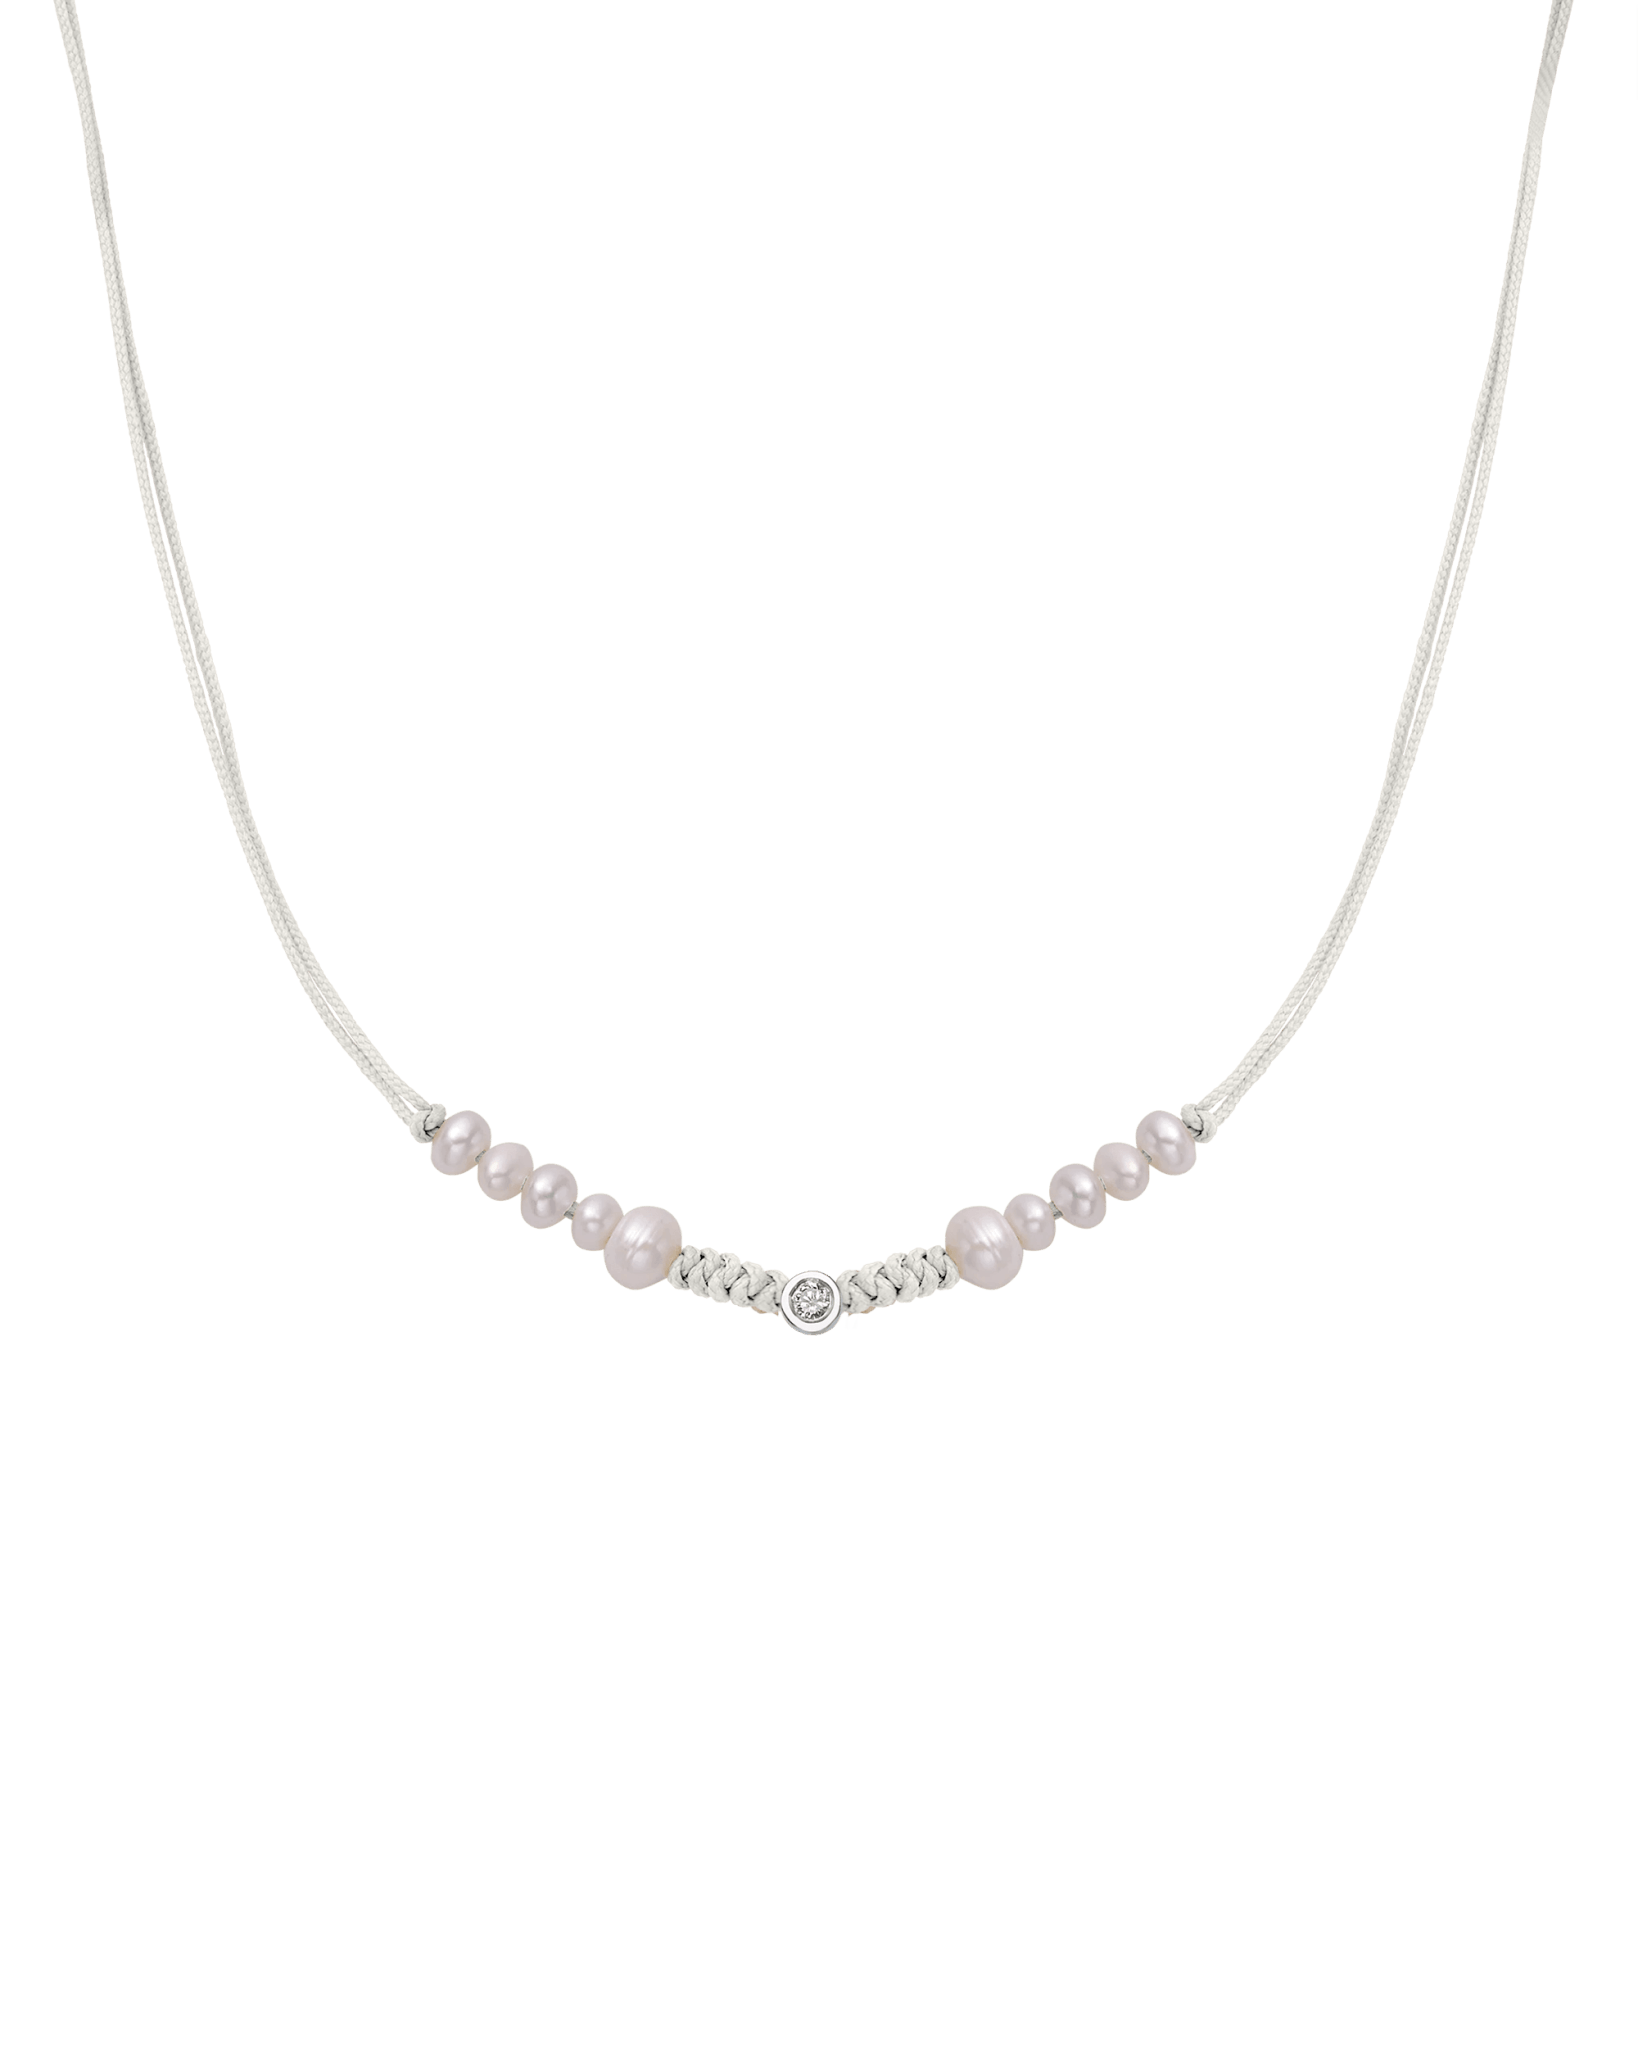 Ten Natural Pearl String of Love Necklace - 14K White Gold Necklaces 14K Solid Gold Pearl Medium: 0.04ct 